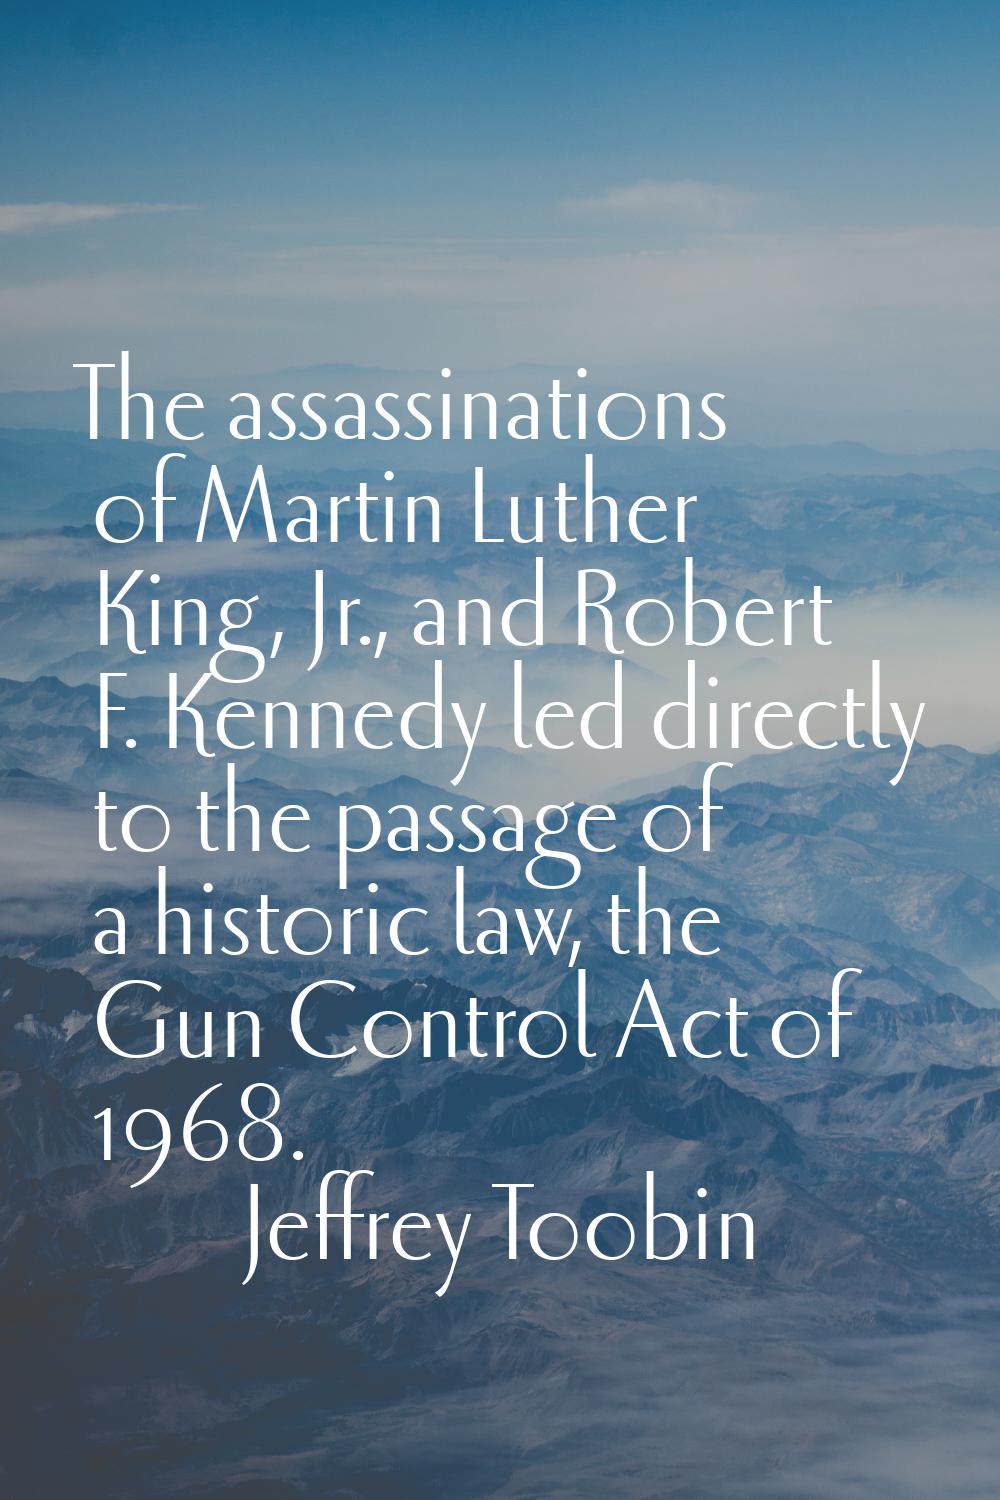 The assassinations of Martin Luther King, Jr., and Robert F. Kennedy led directly to the passage of